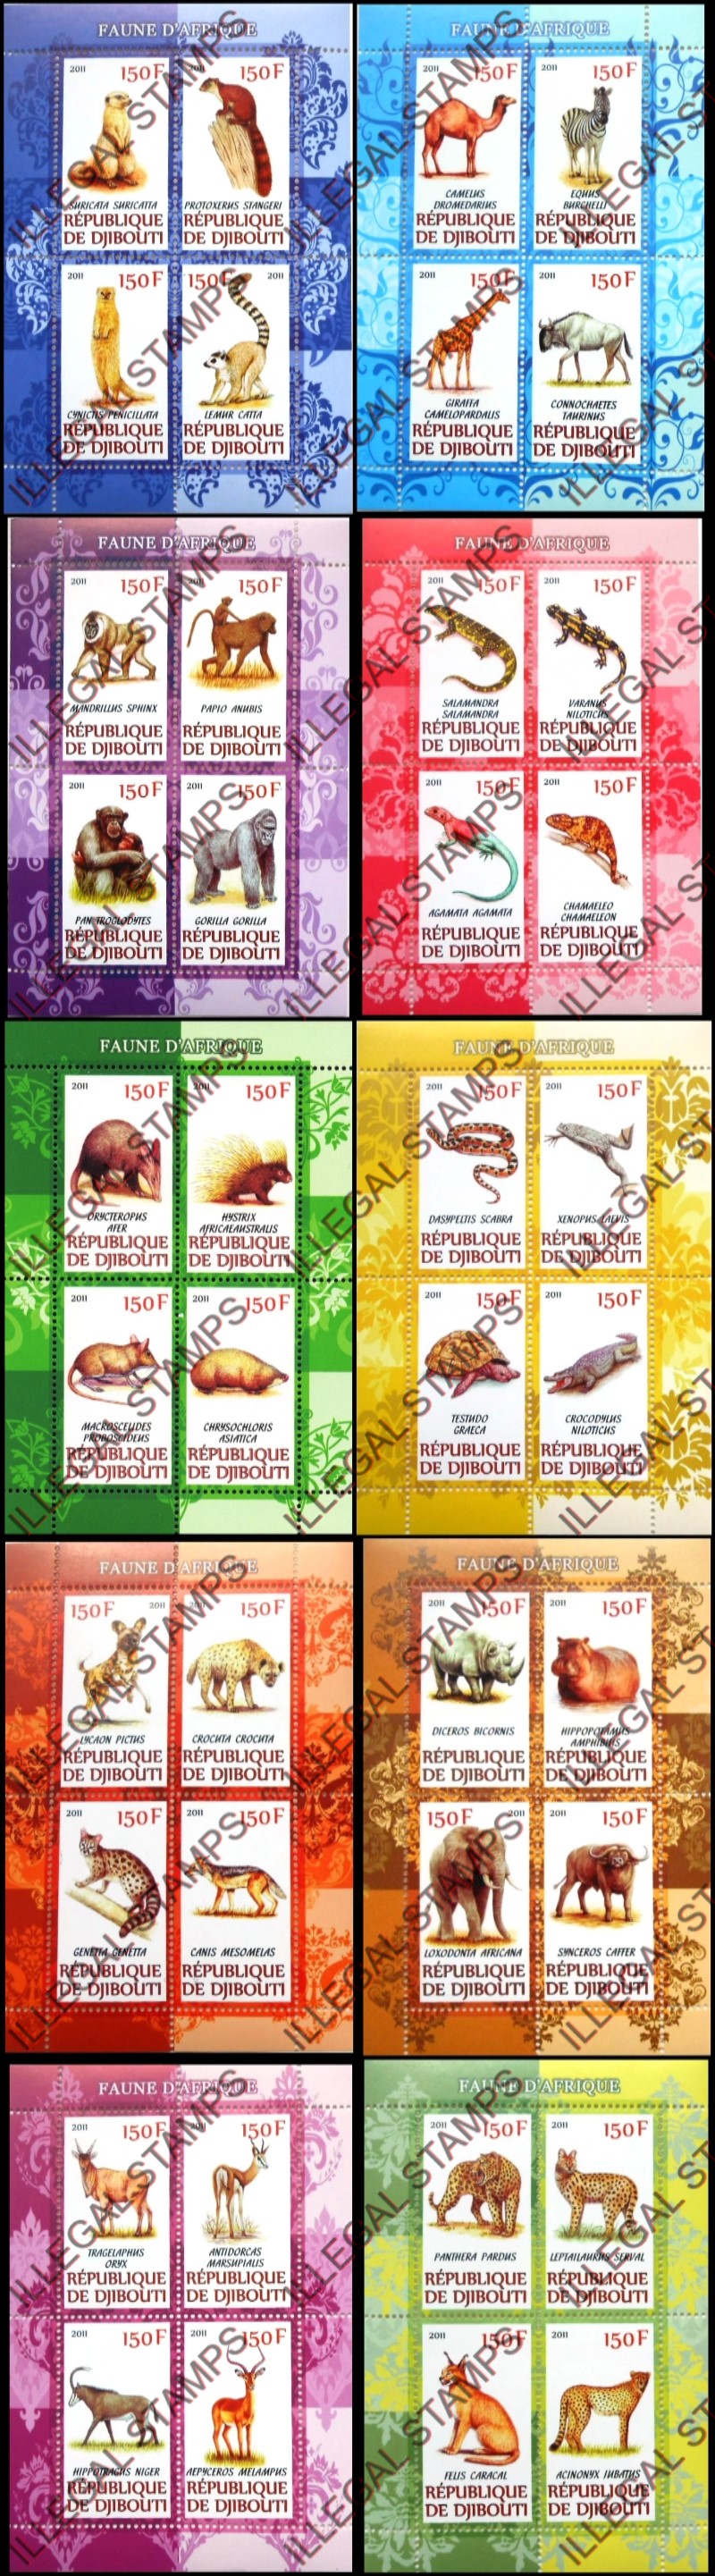 Djibouti 2011 African Fauna Illegal Stamp Souvenir Sheets of 4